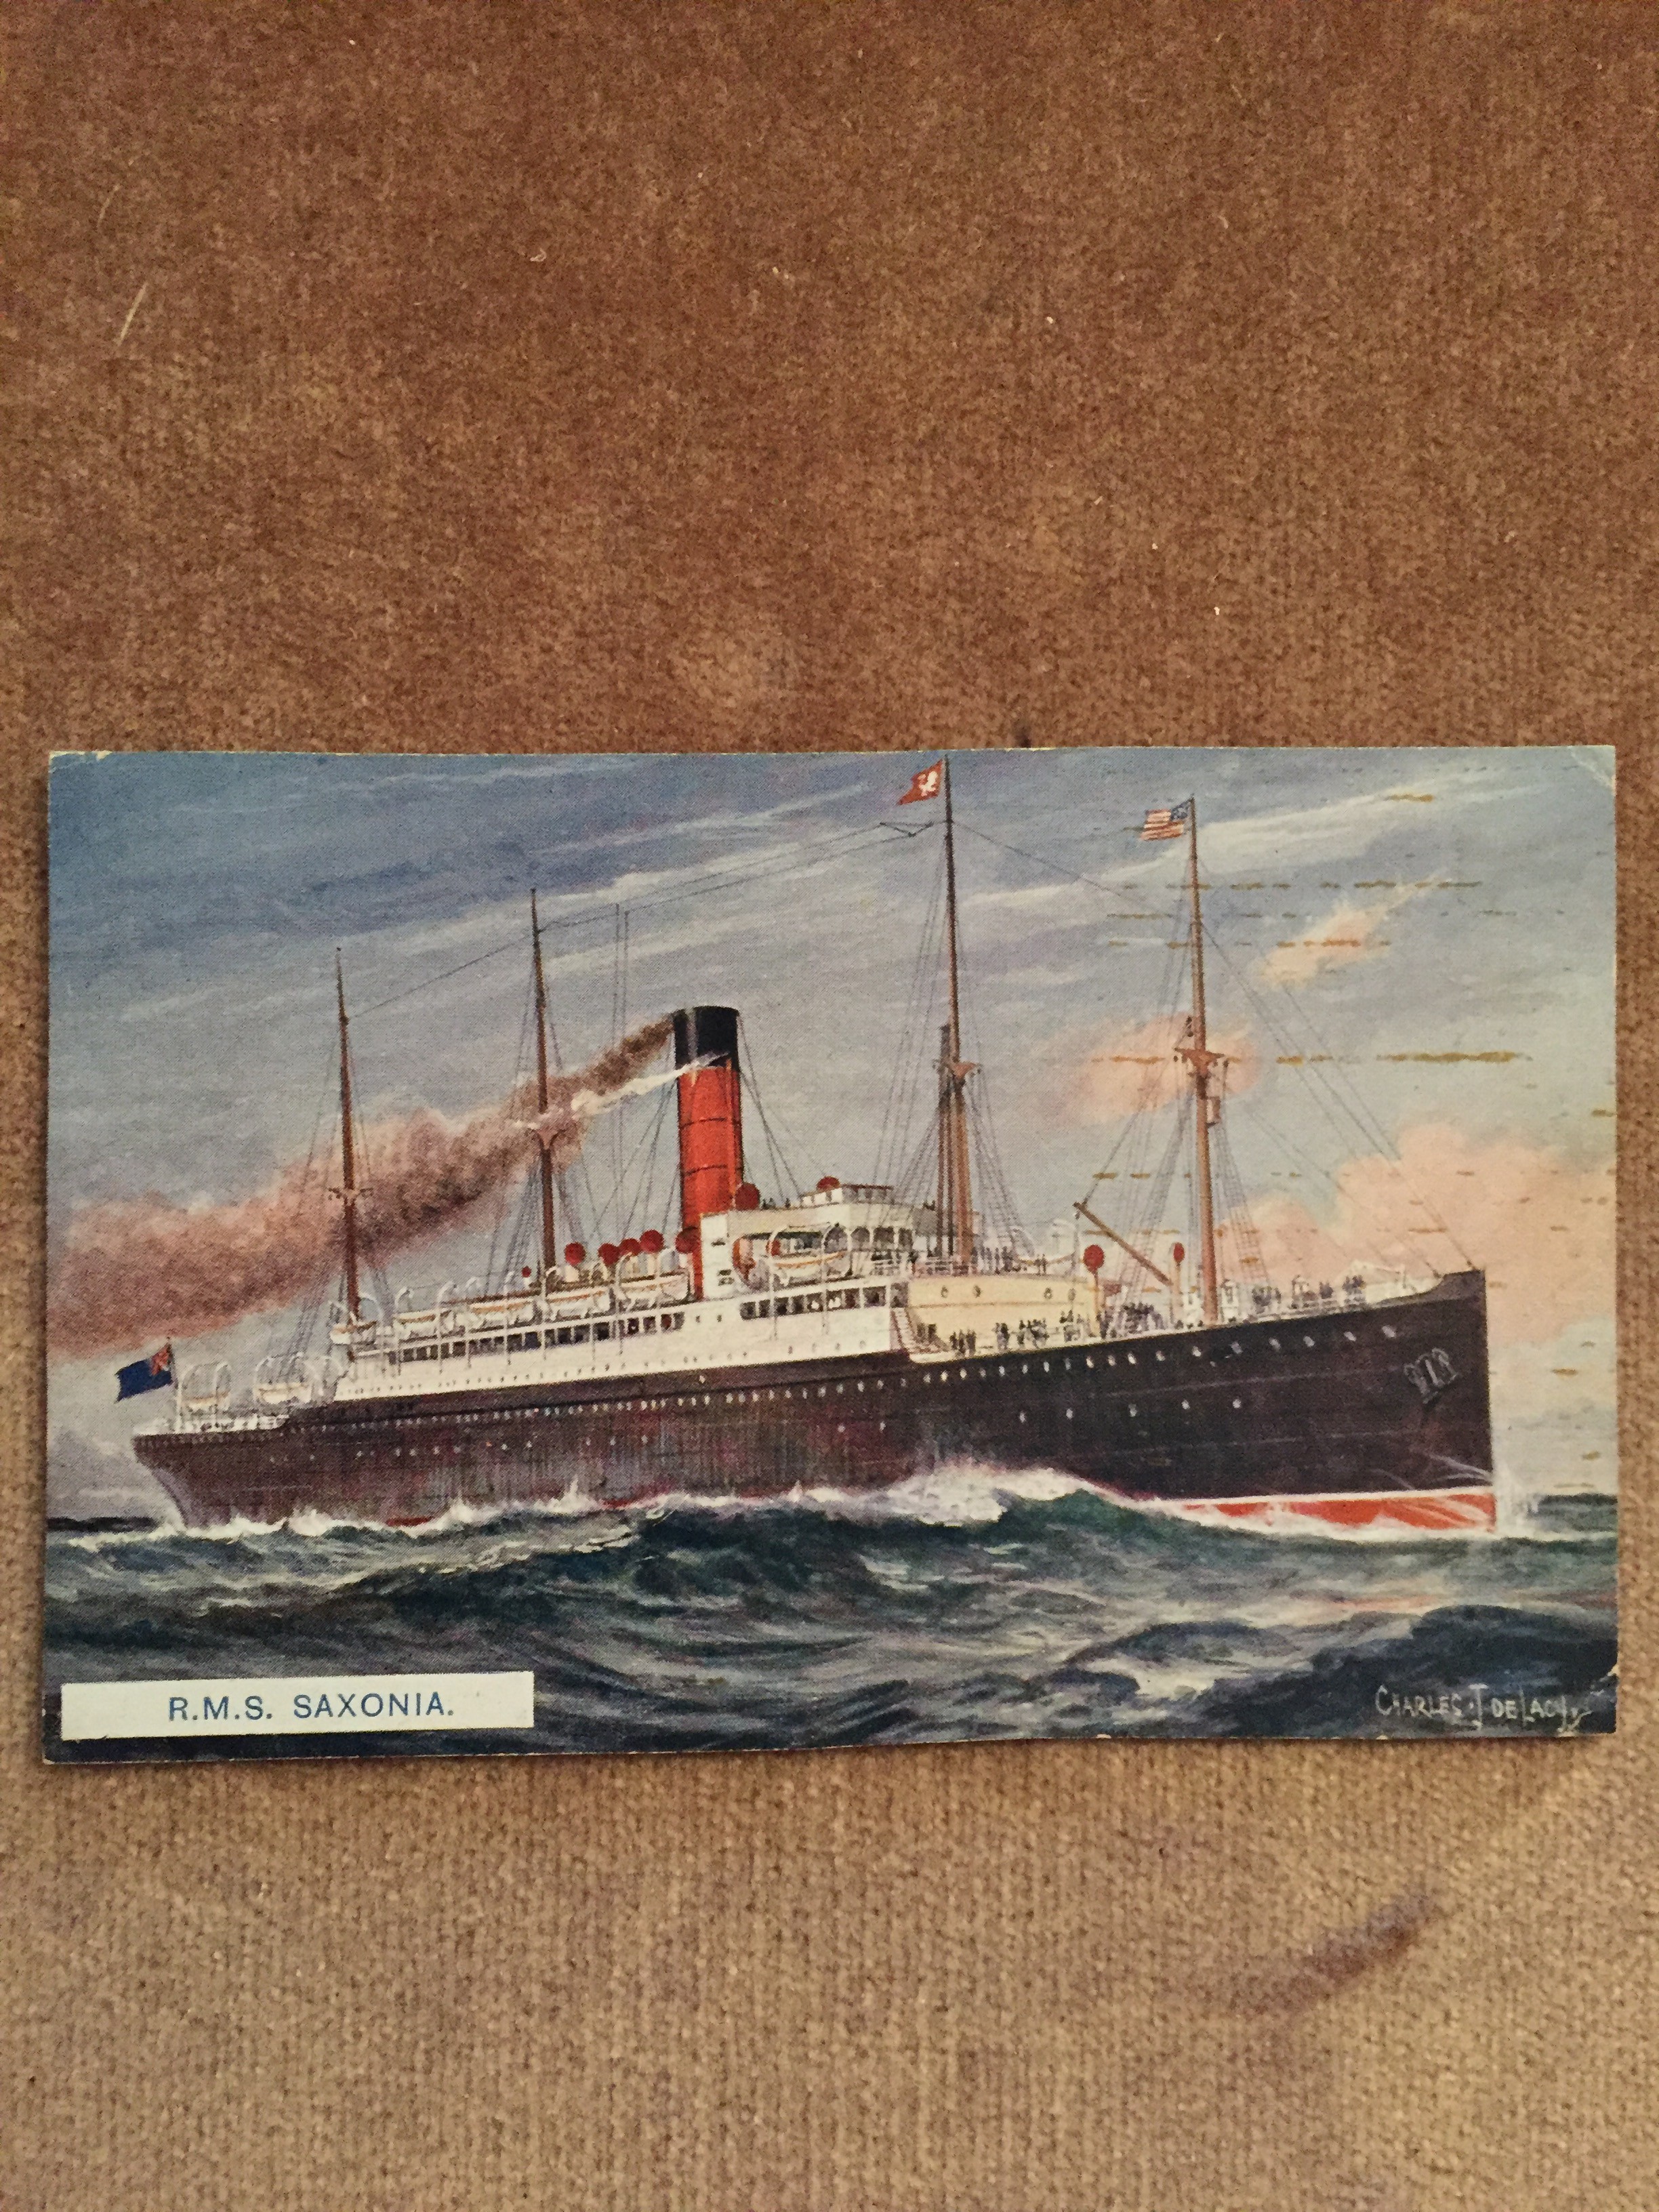 UNUSED COLOUR POSTCARD FROM THE OLD CUNARD LINE VESSEL THE RMS SAXONIA